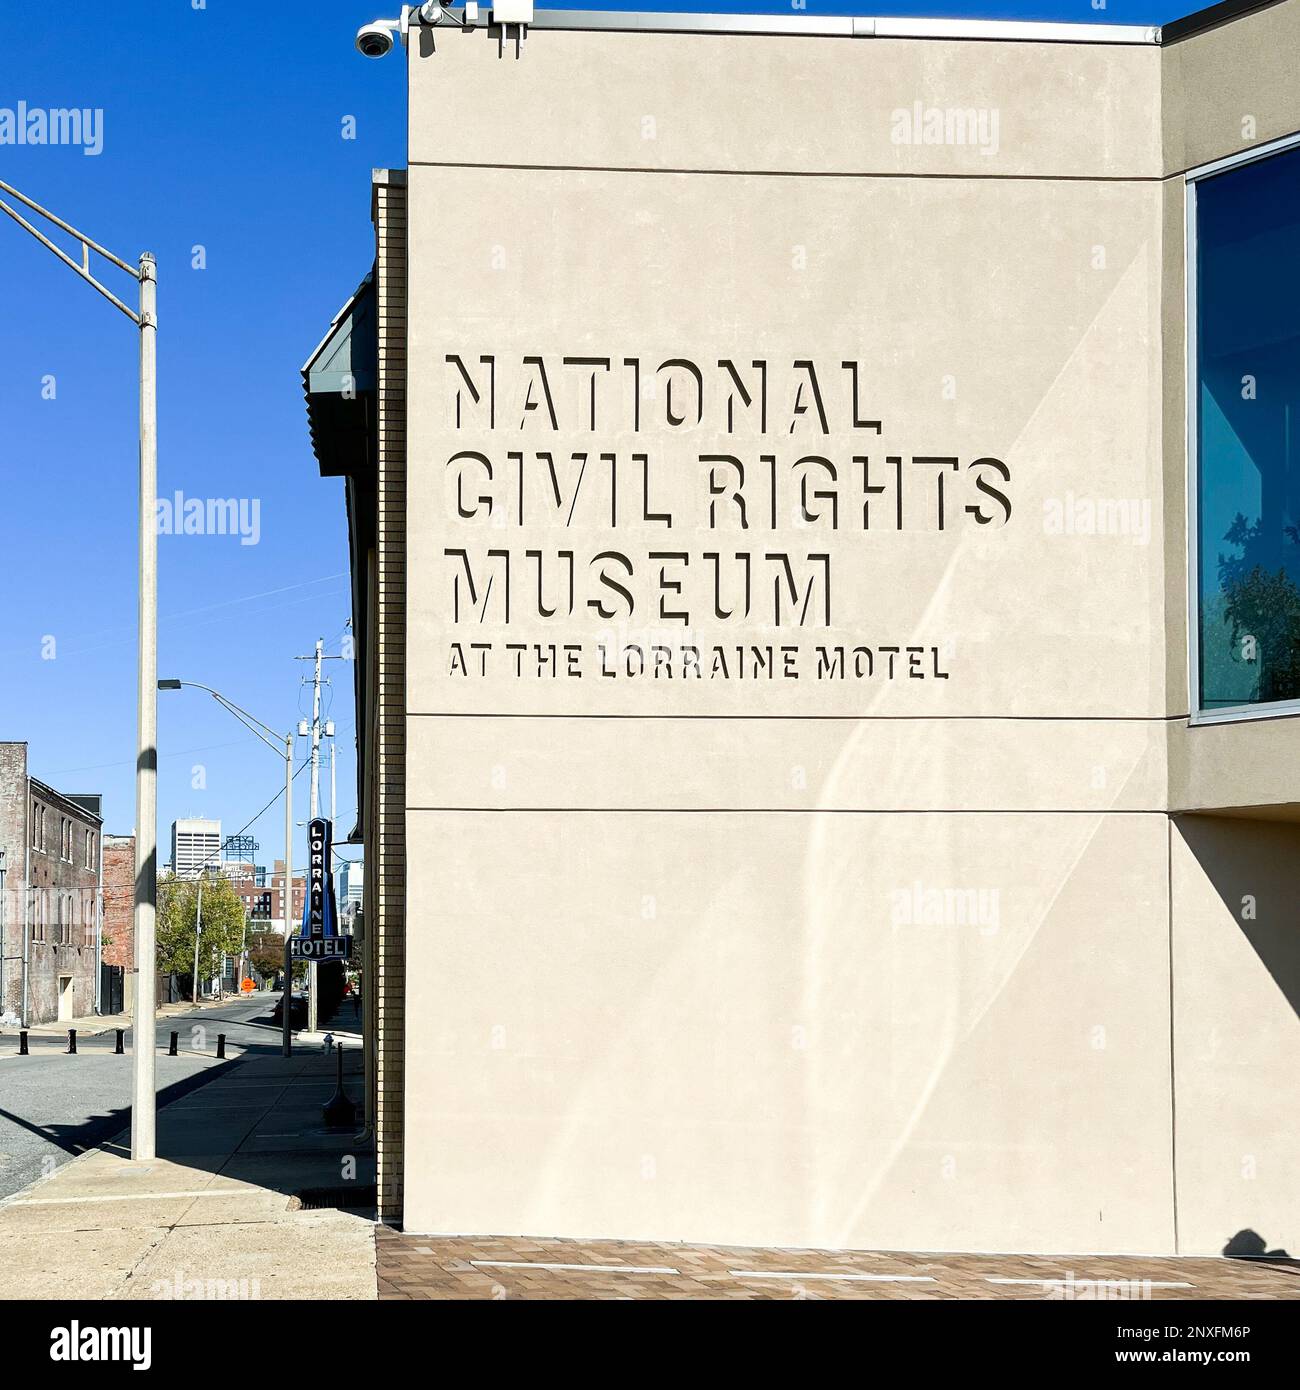 Exterior of the National Civil Rights Museum, Lorraine Motel, Memphis, Tennessee, showing signage engraved into stone facade. Bright sunshine. Stock Photo